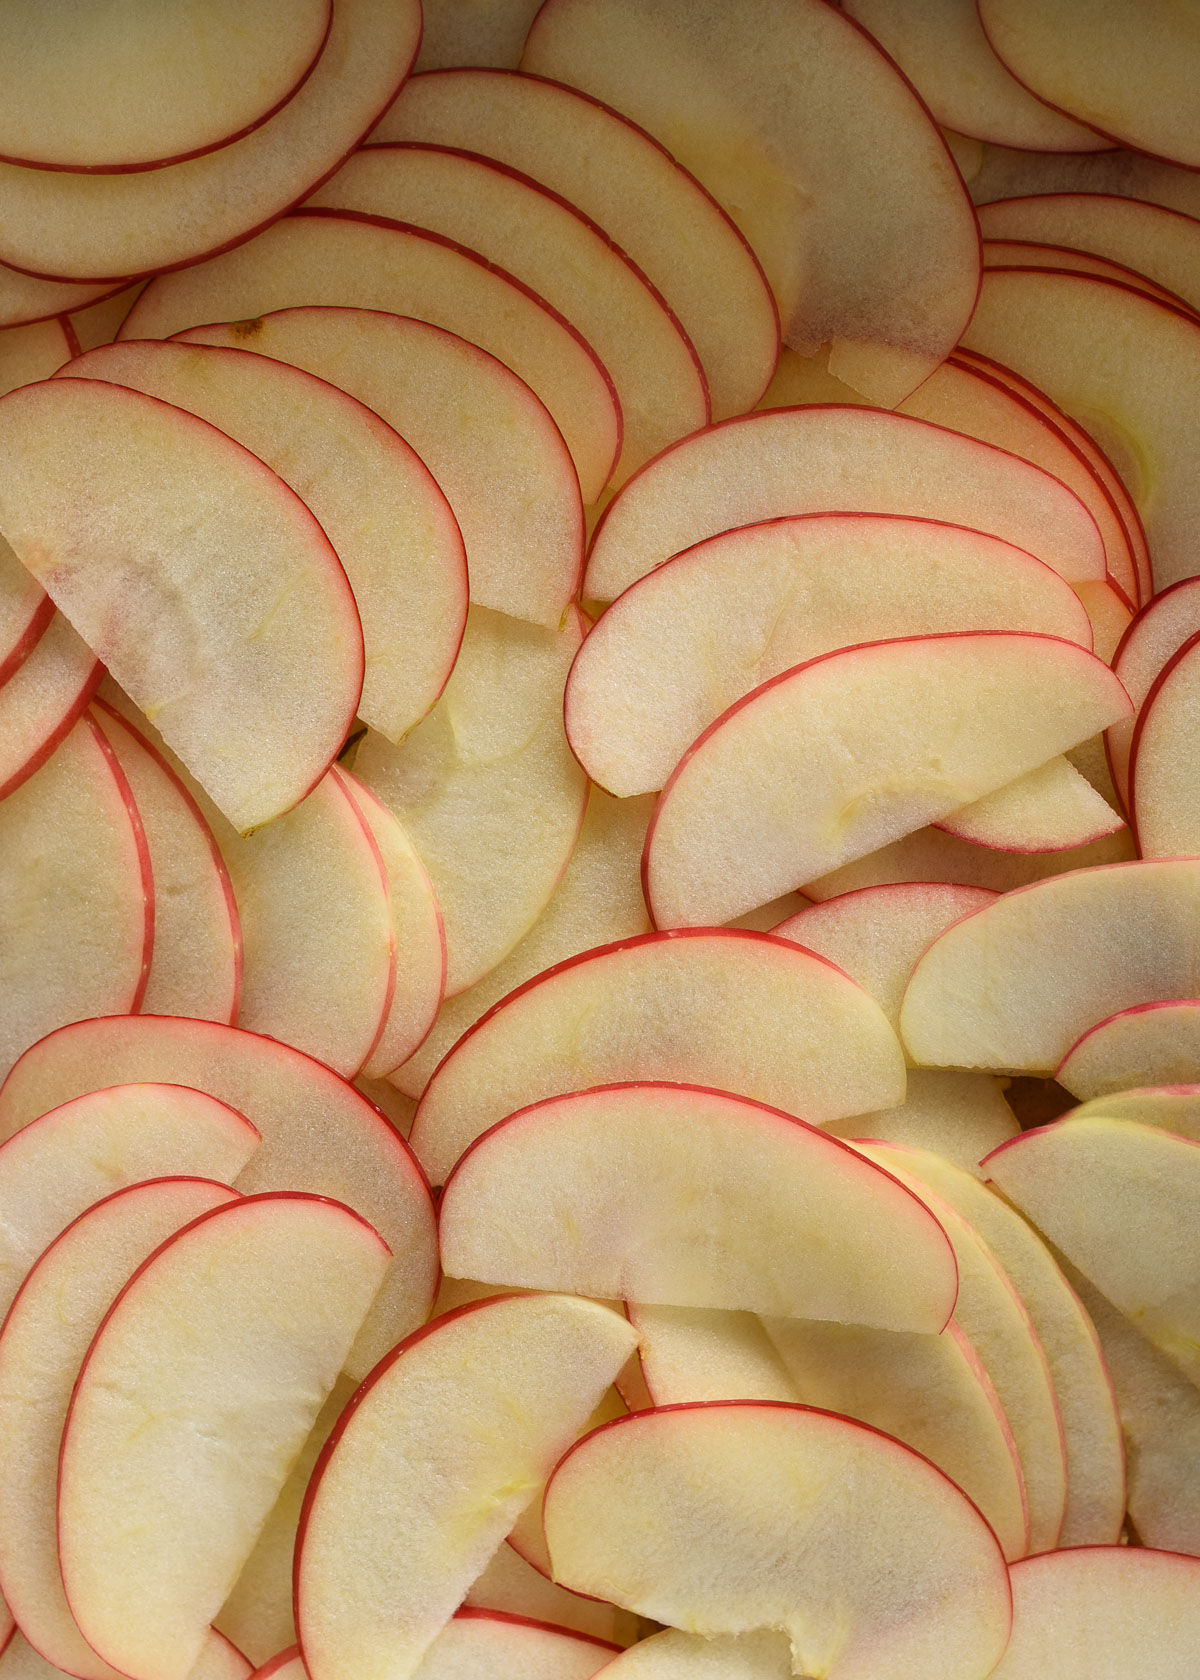 Layers of thinly sliced apples form the filling of apple crumb bars.